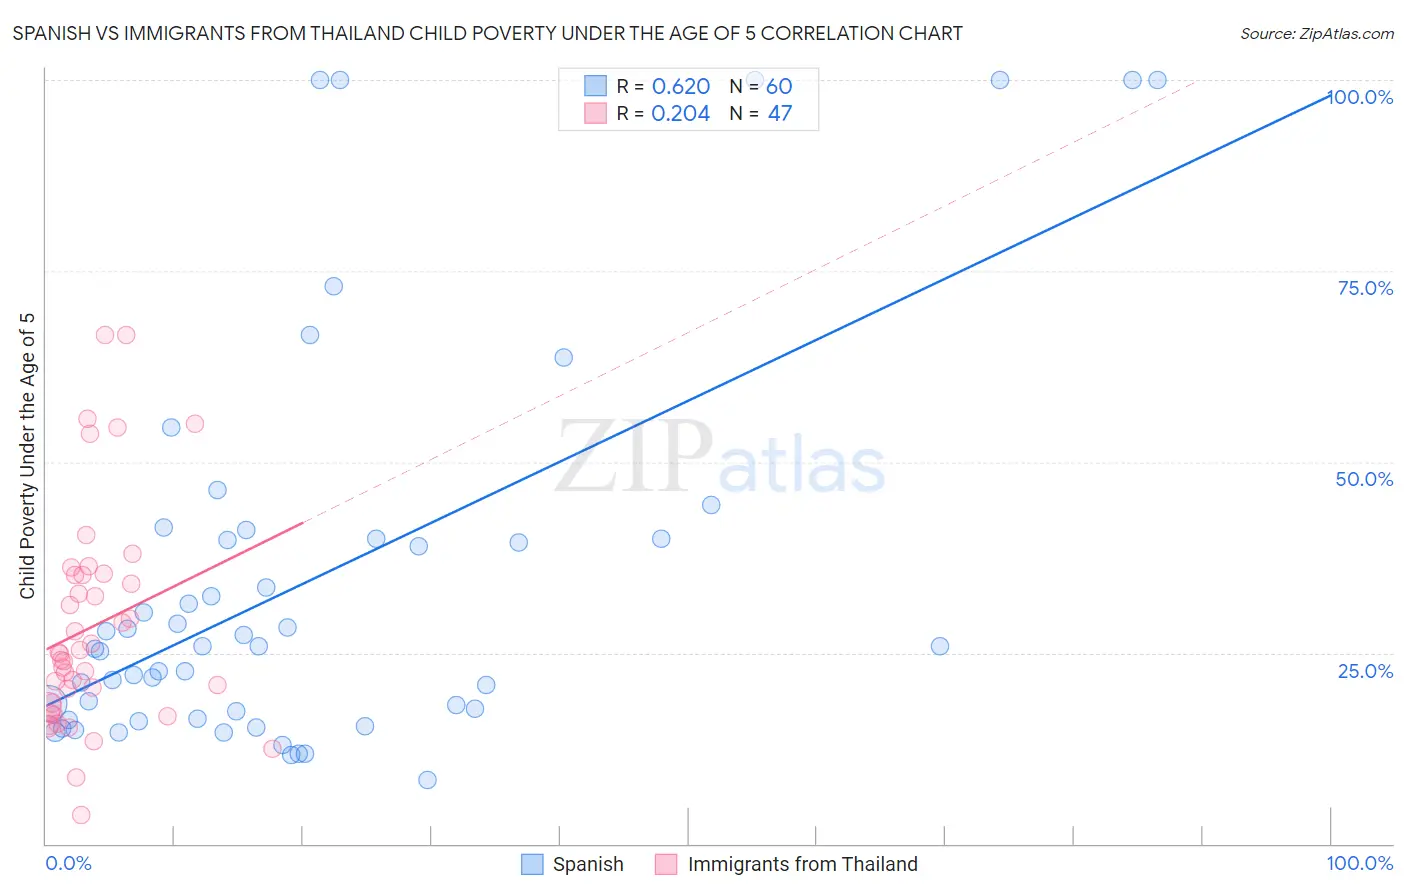 Spanish vs Immigrants from Thailand Child Poverty Under the Age of 5